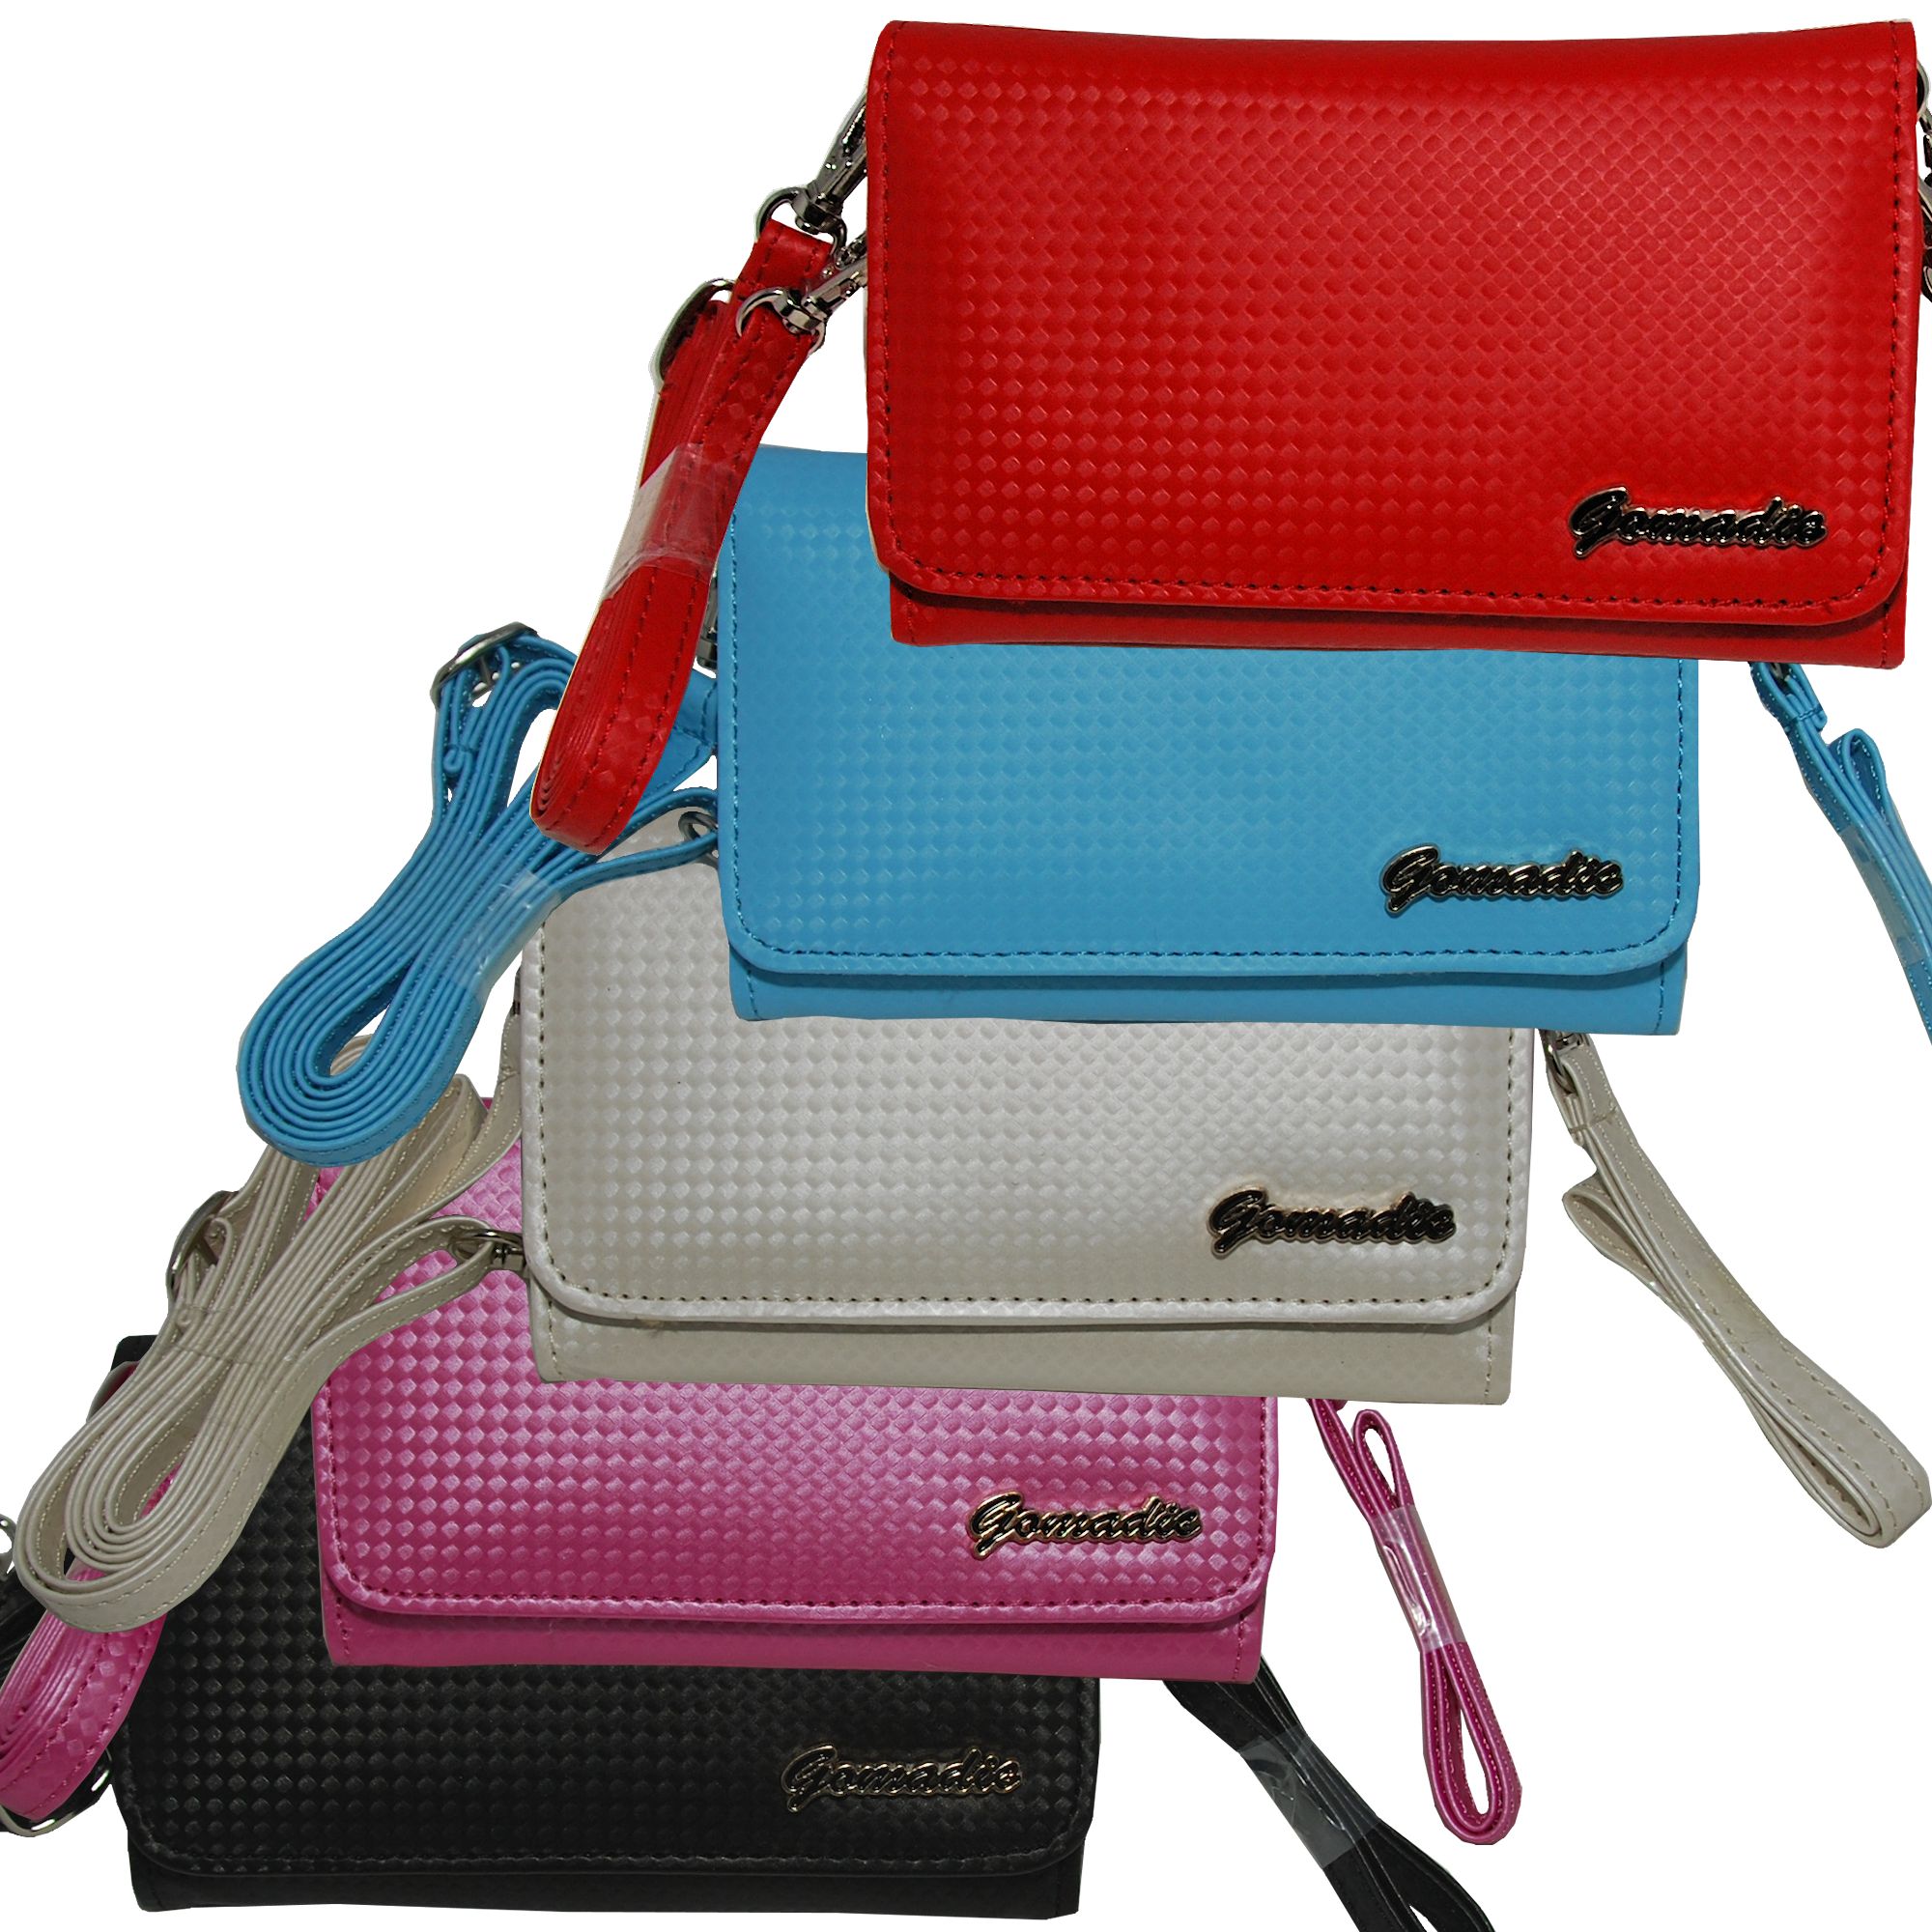 Purse Handbag Case for the Nokia Surge  - Color Options Blue Pink White Black and Red